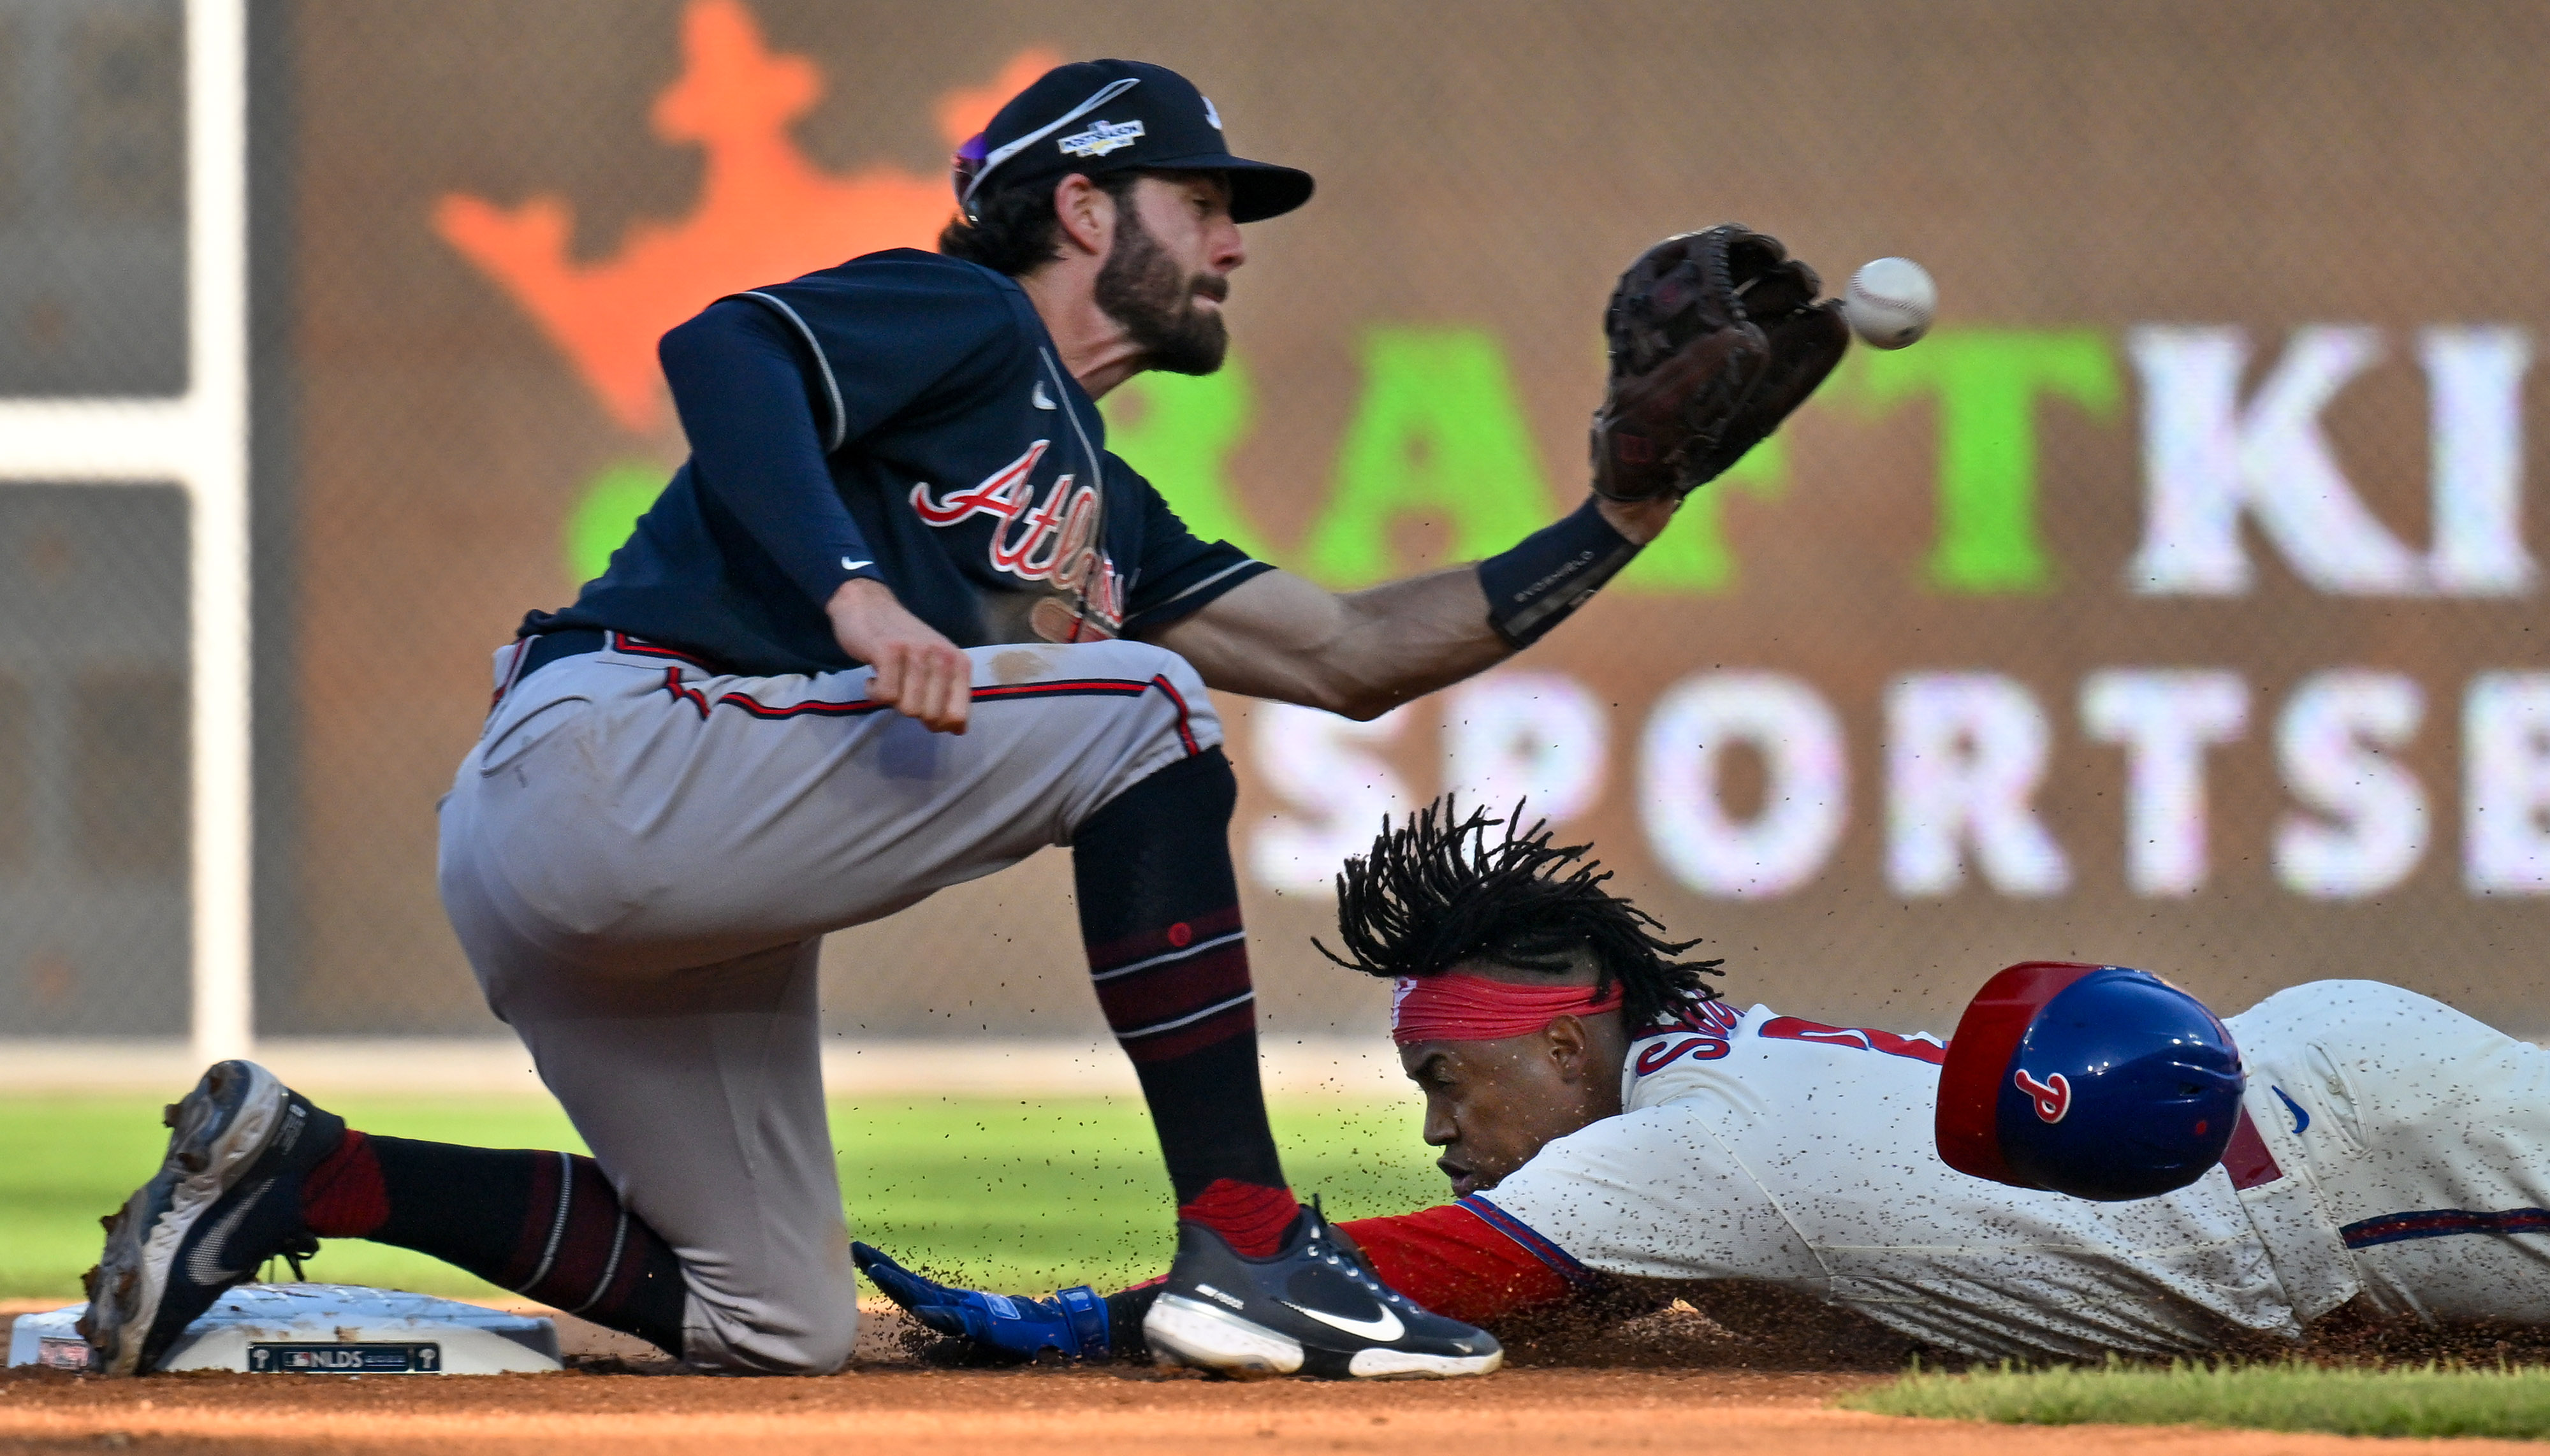 Dansby Swanson free agent profile